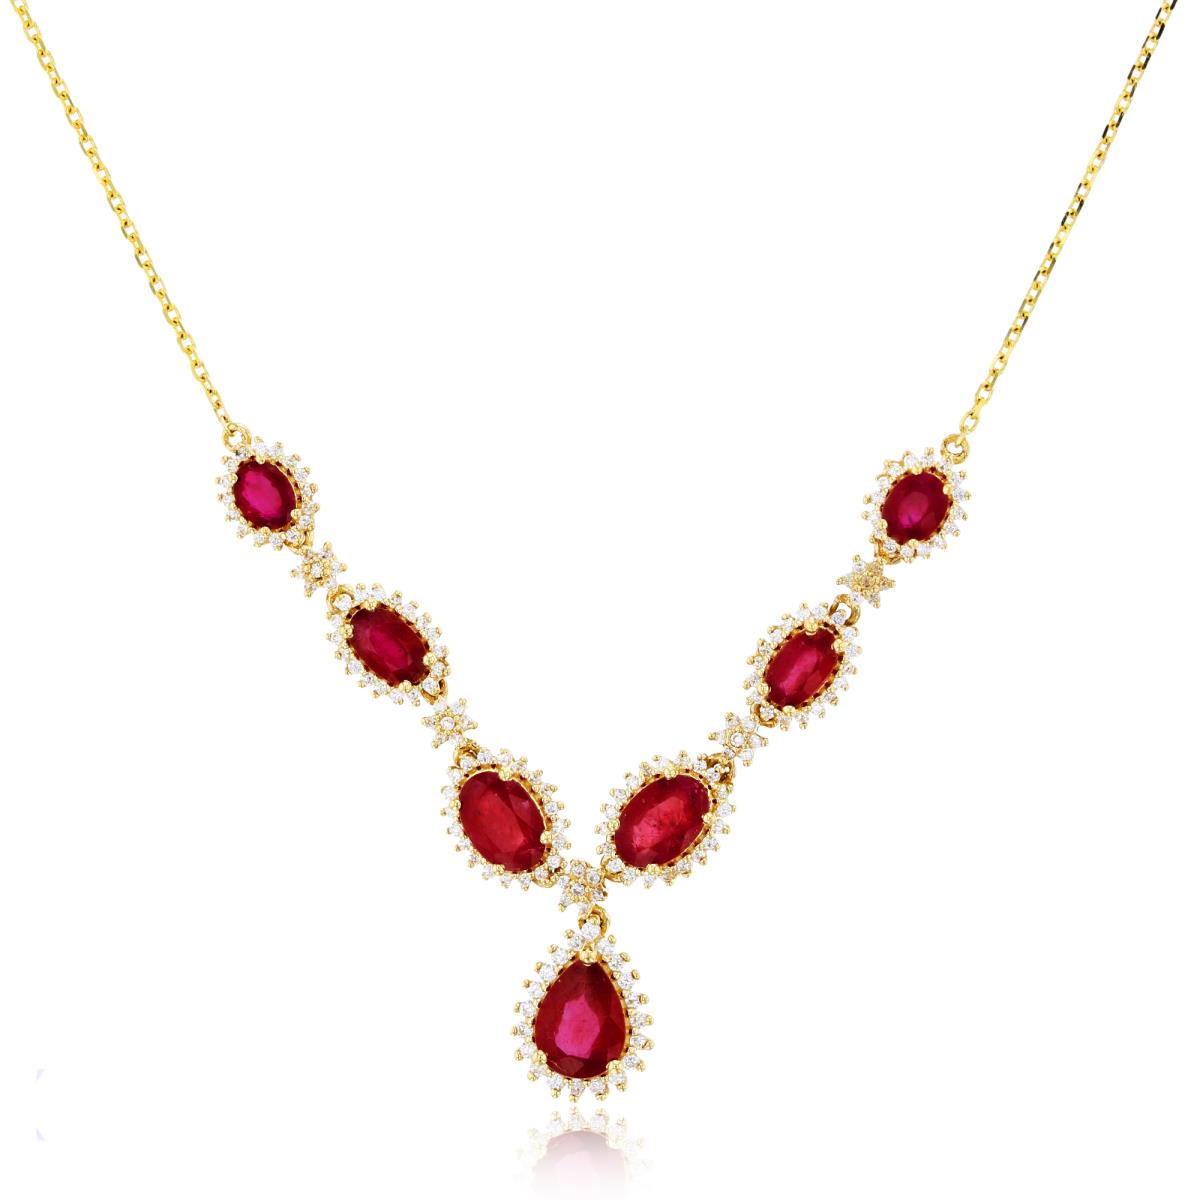 14K Yellow Gold 0.5 CTTW Rnd Diam & PS/Ov Ruby Dangling 18"+2"ext Y-Necklace